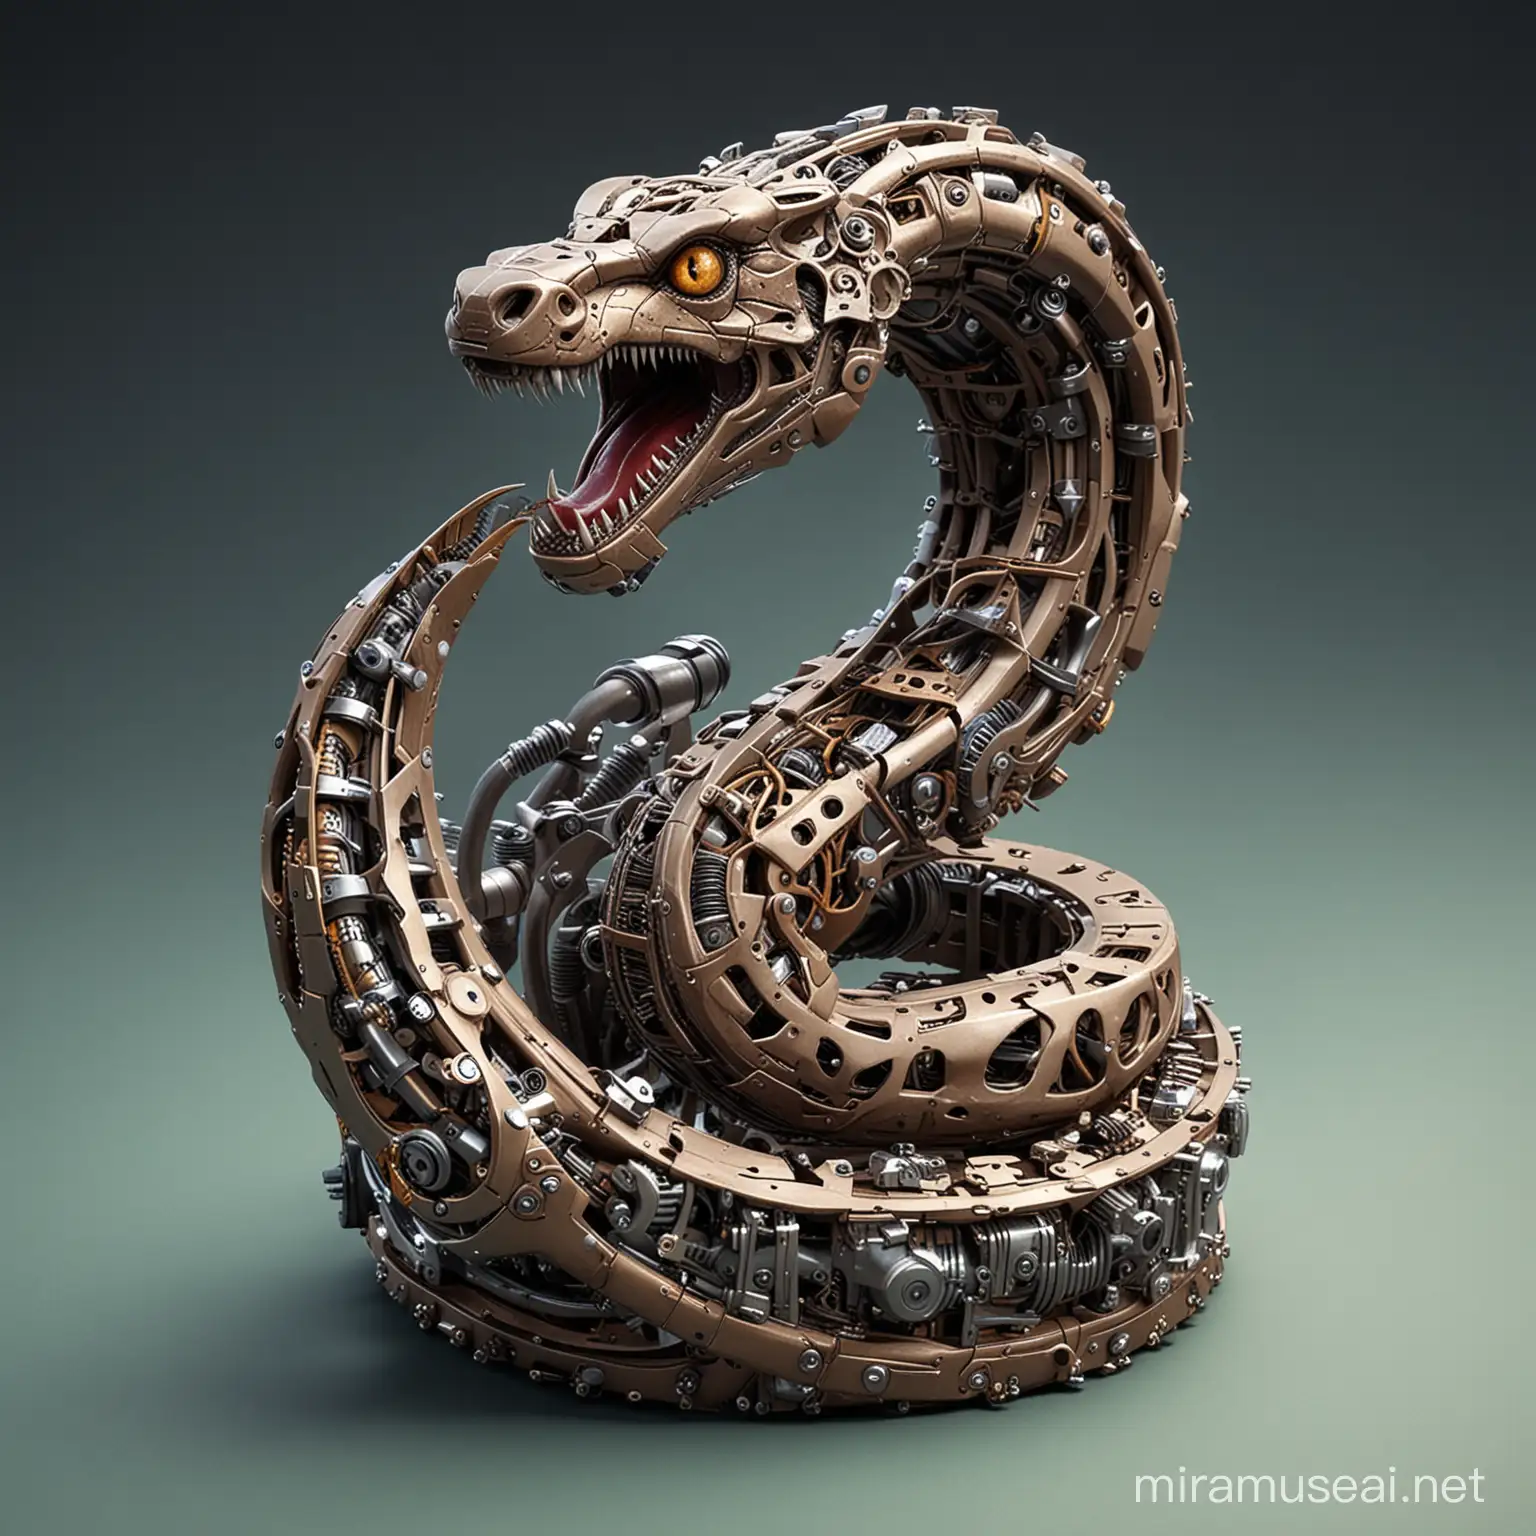 Metallic Serpent Sculpture Coiled in Industrial Setting